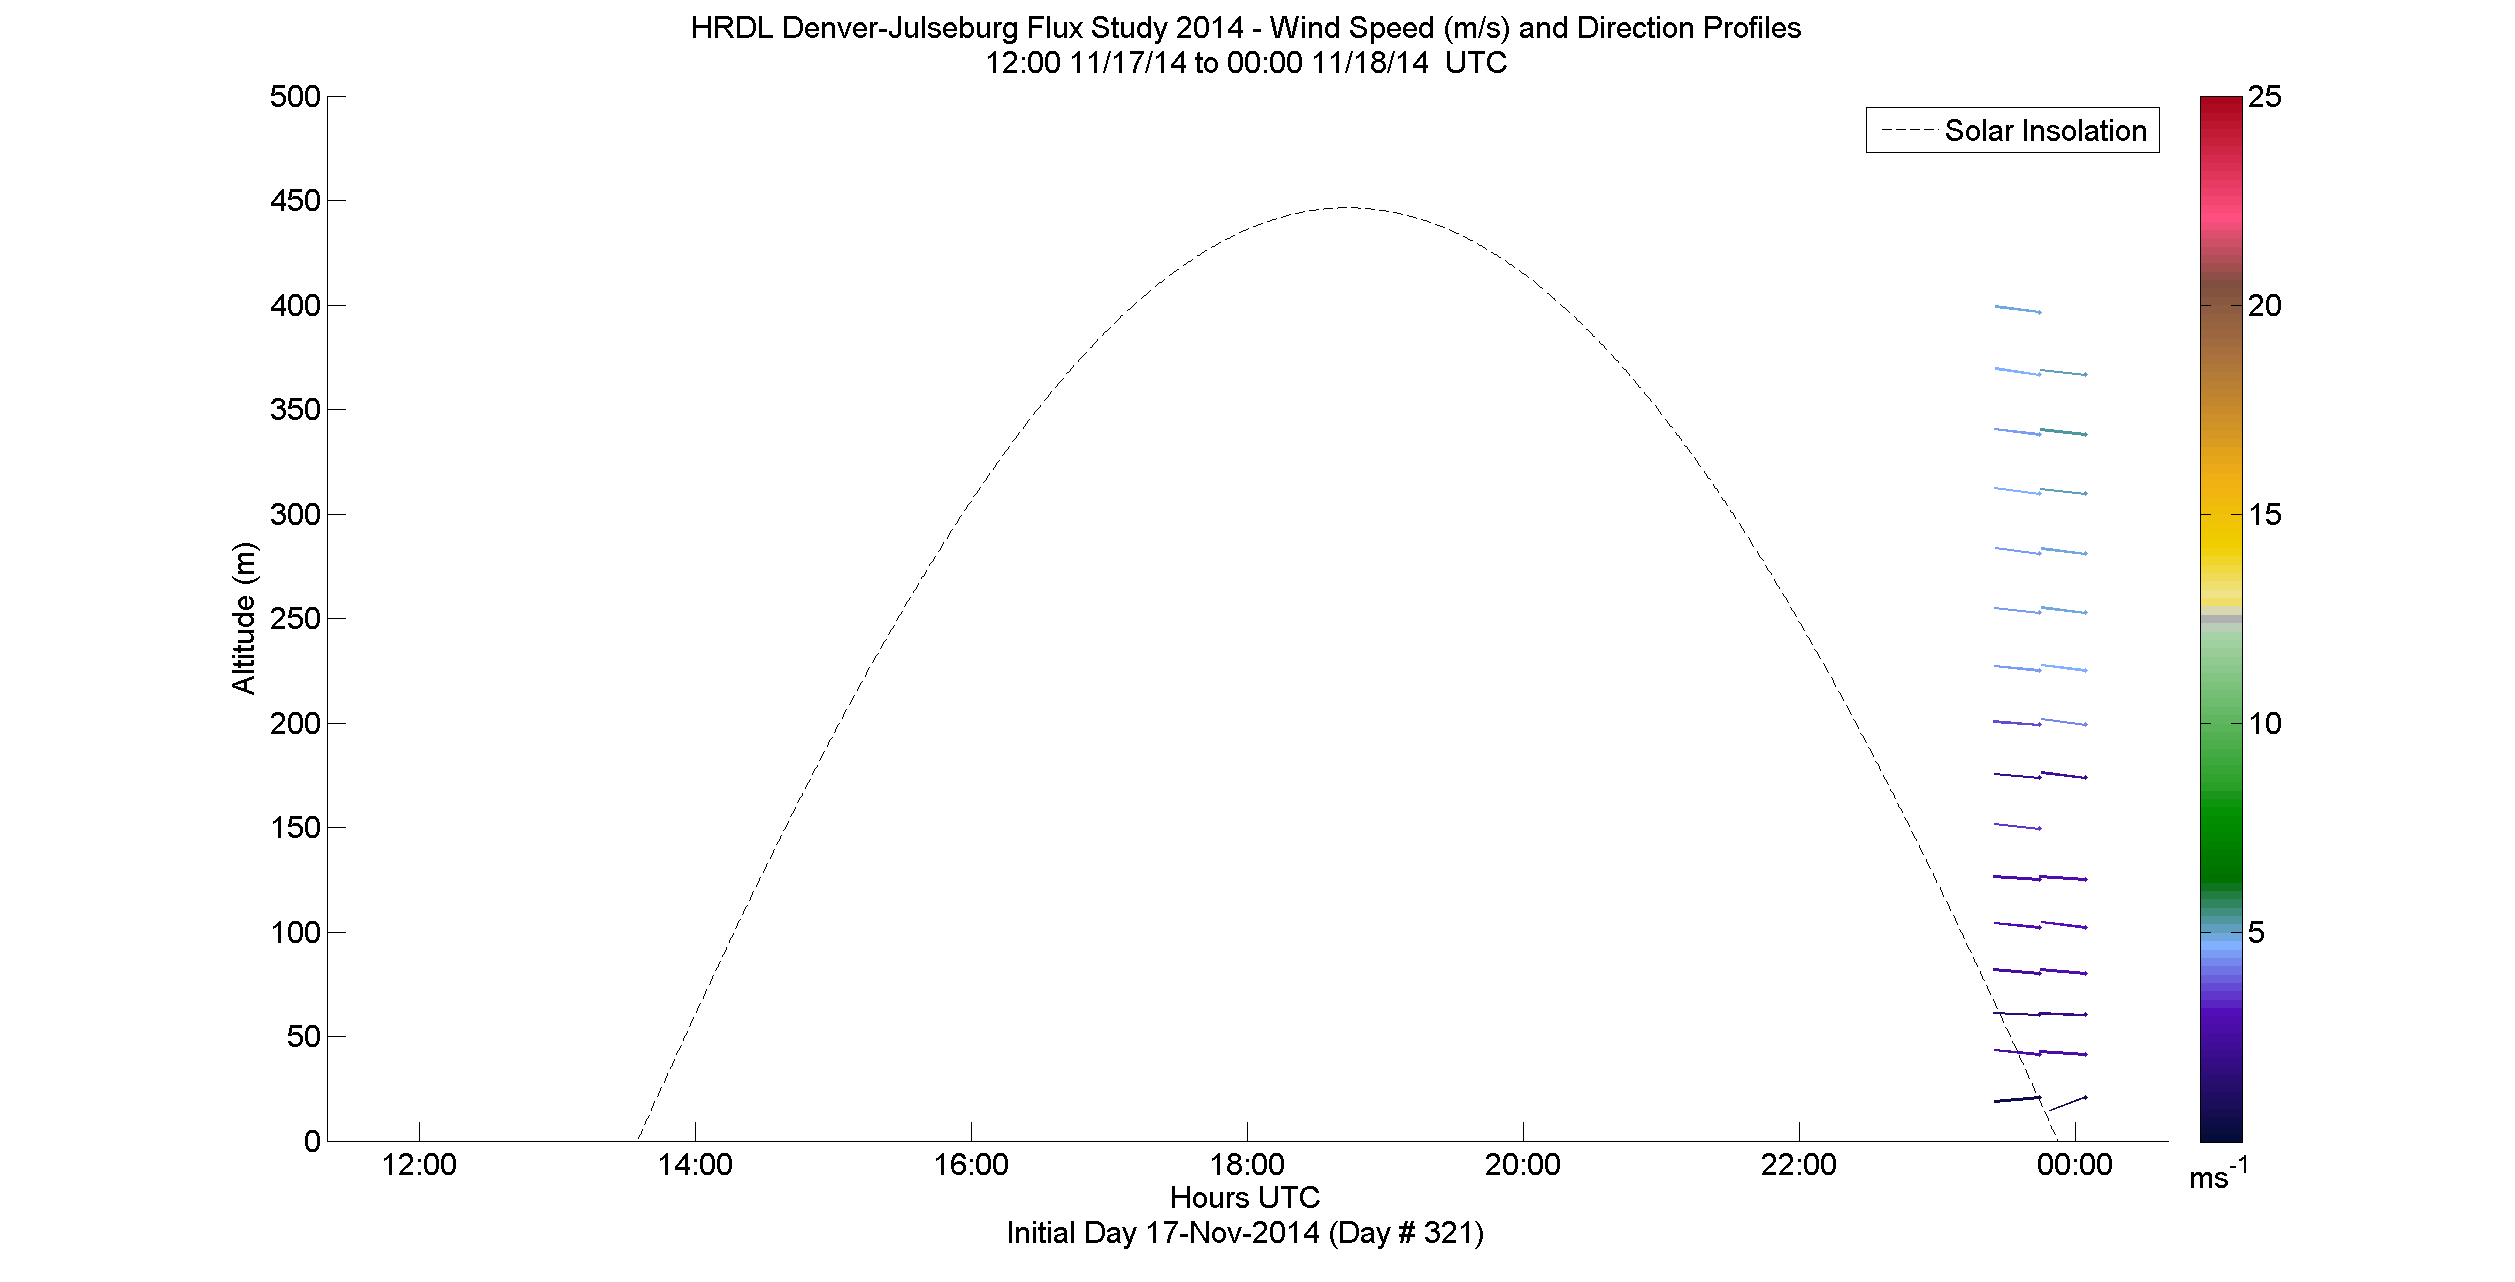 HRDL speed and direction profile - November 17 pm